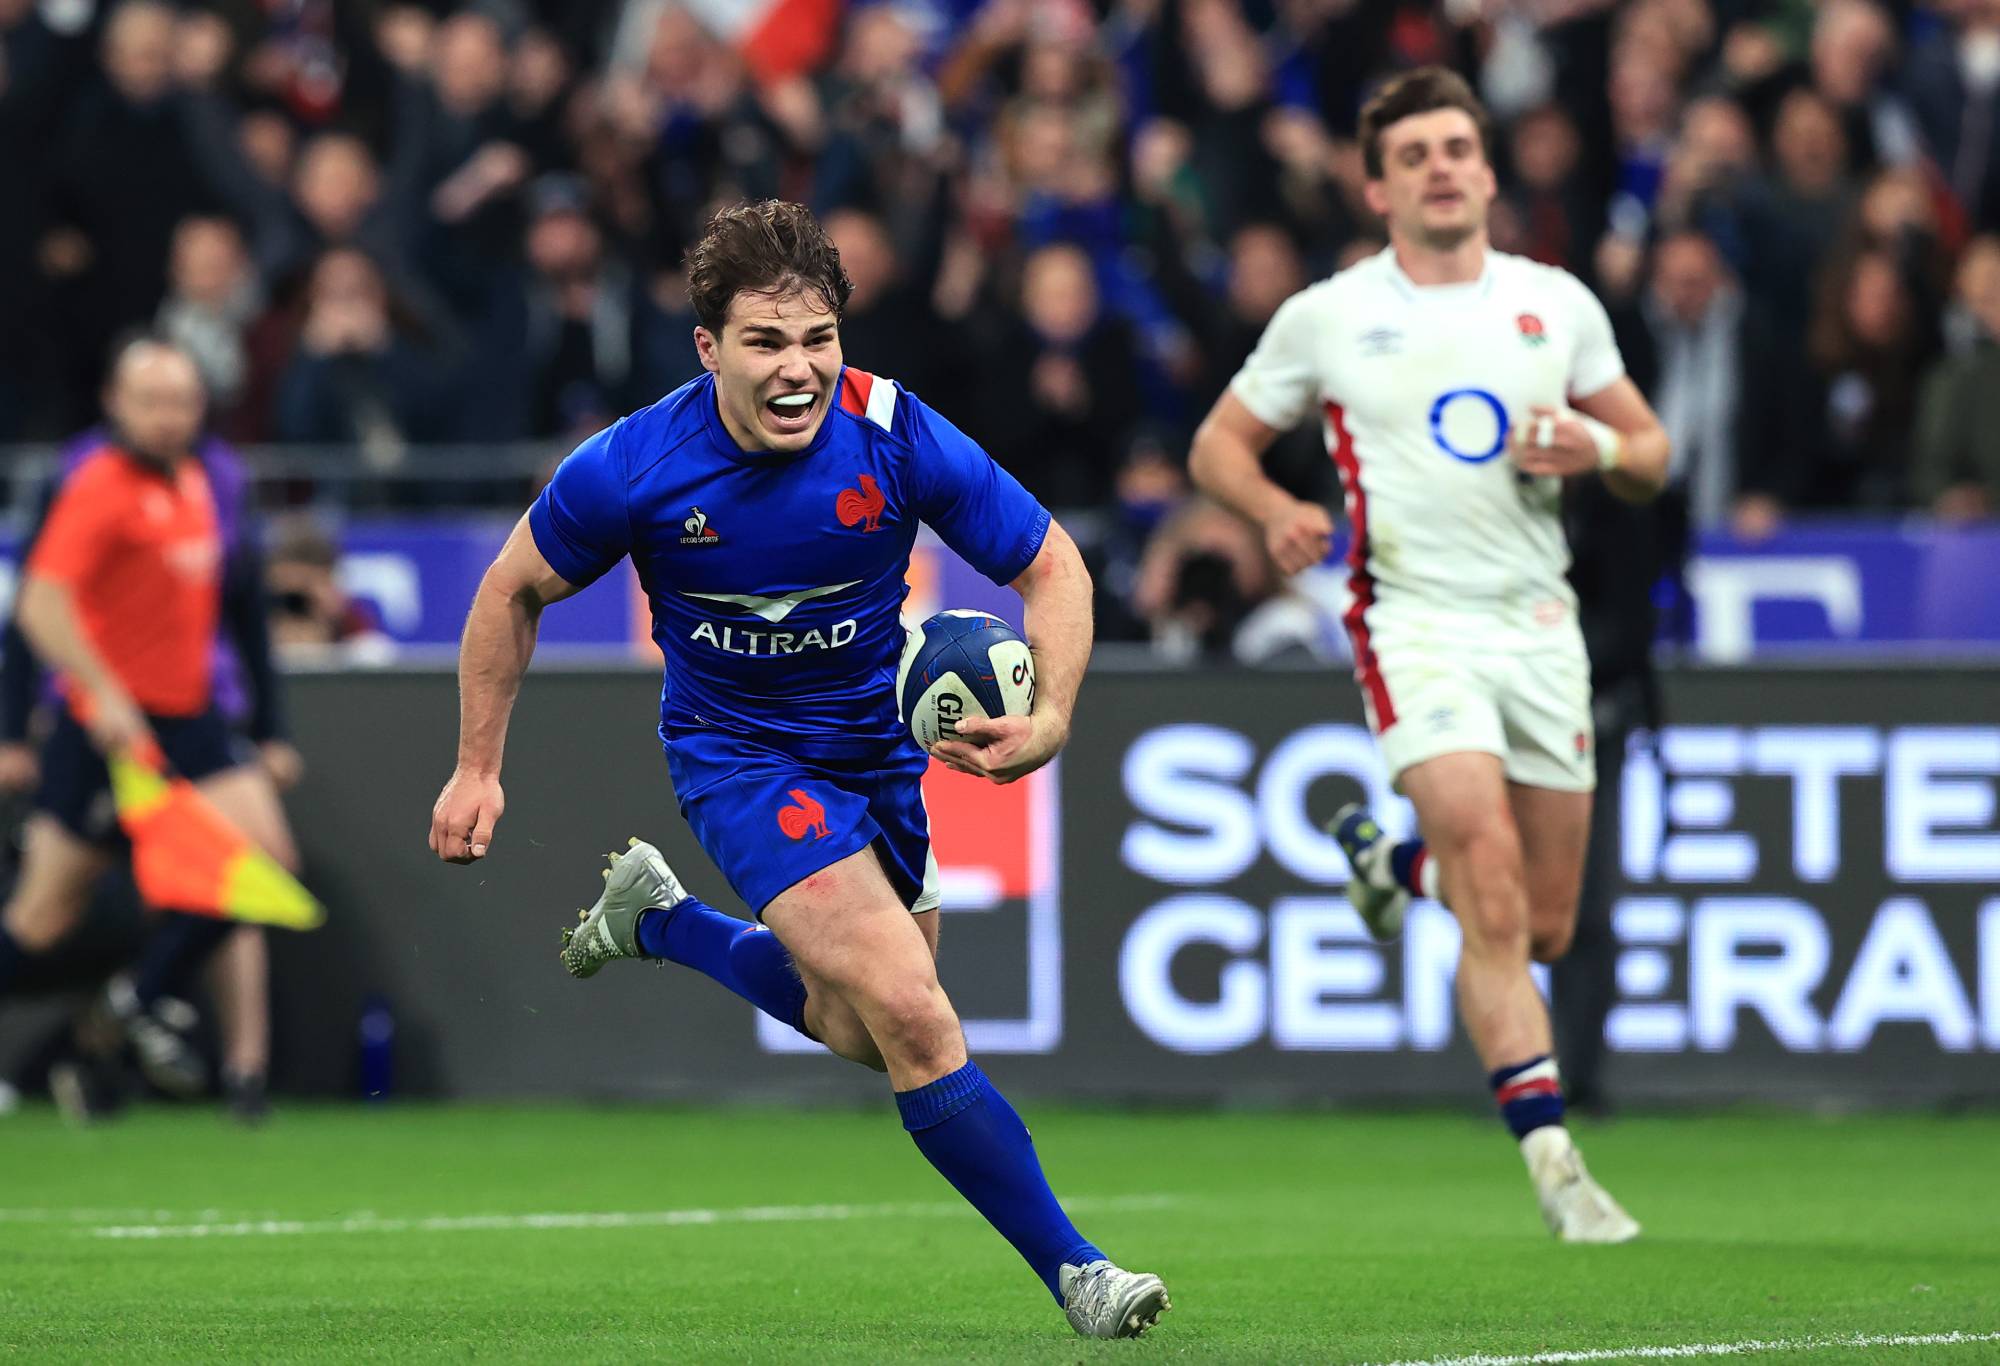 Antoine Dupont of France breaks through to score their side's third try during the Guinness Six Nations Rugby match between France and England at Stade de France on March 19, 2022 in Paris, France. (Photo by David Rogers/Getty Images)